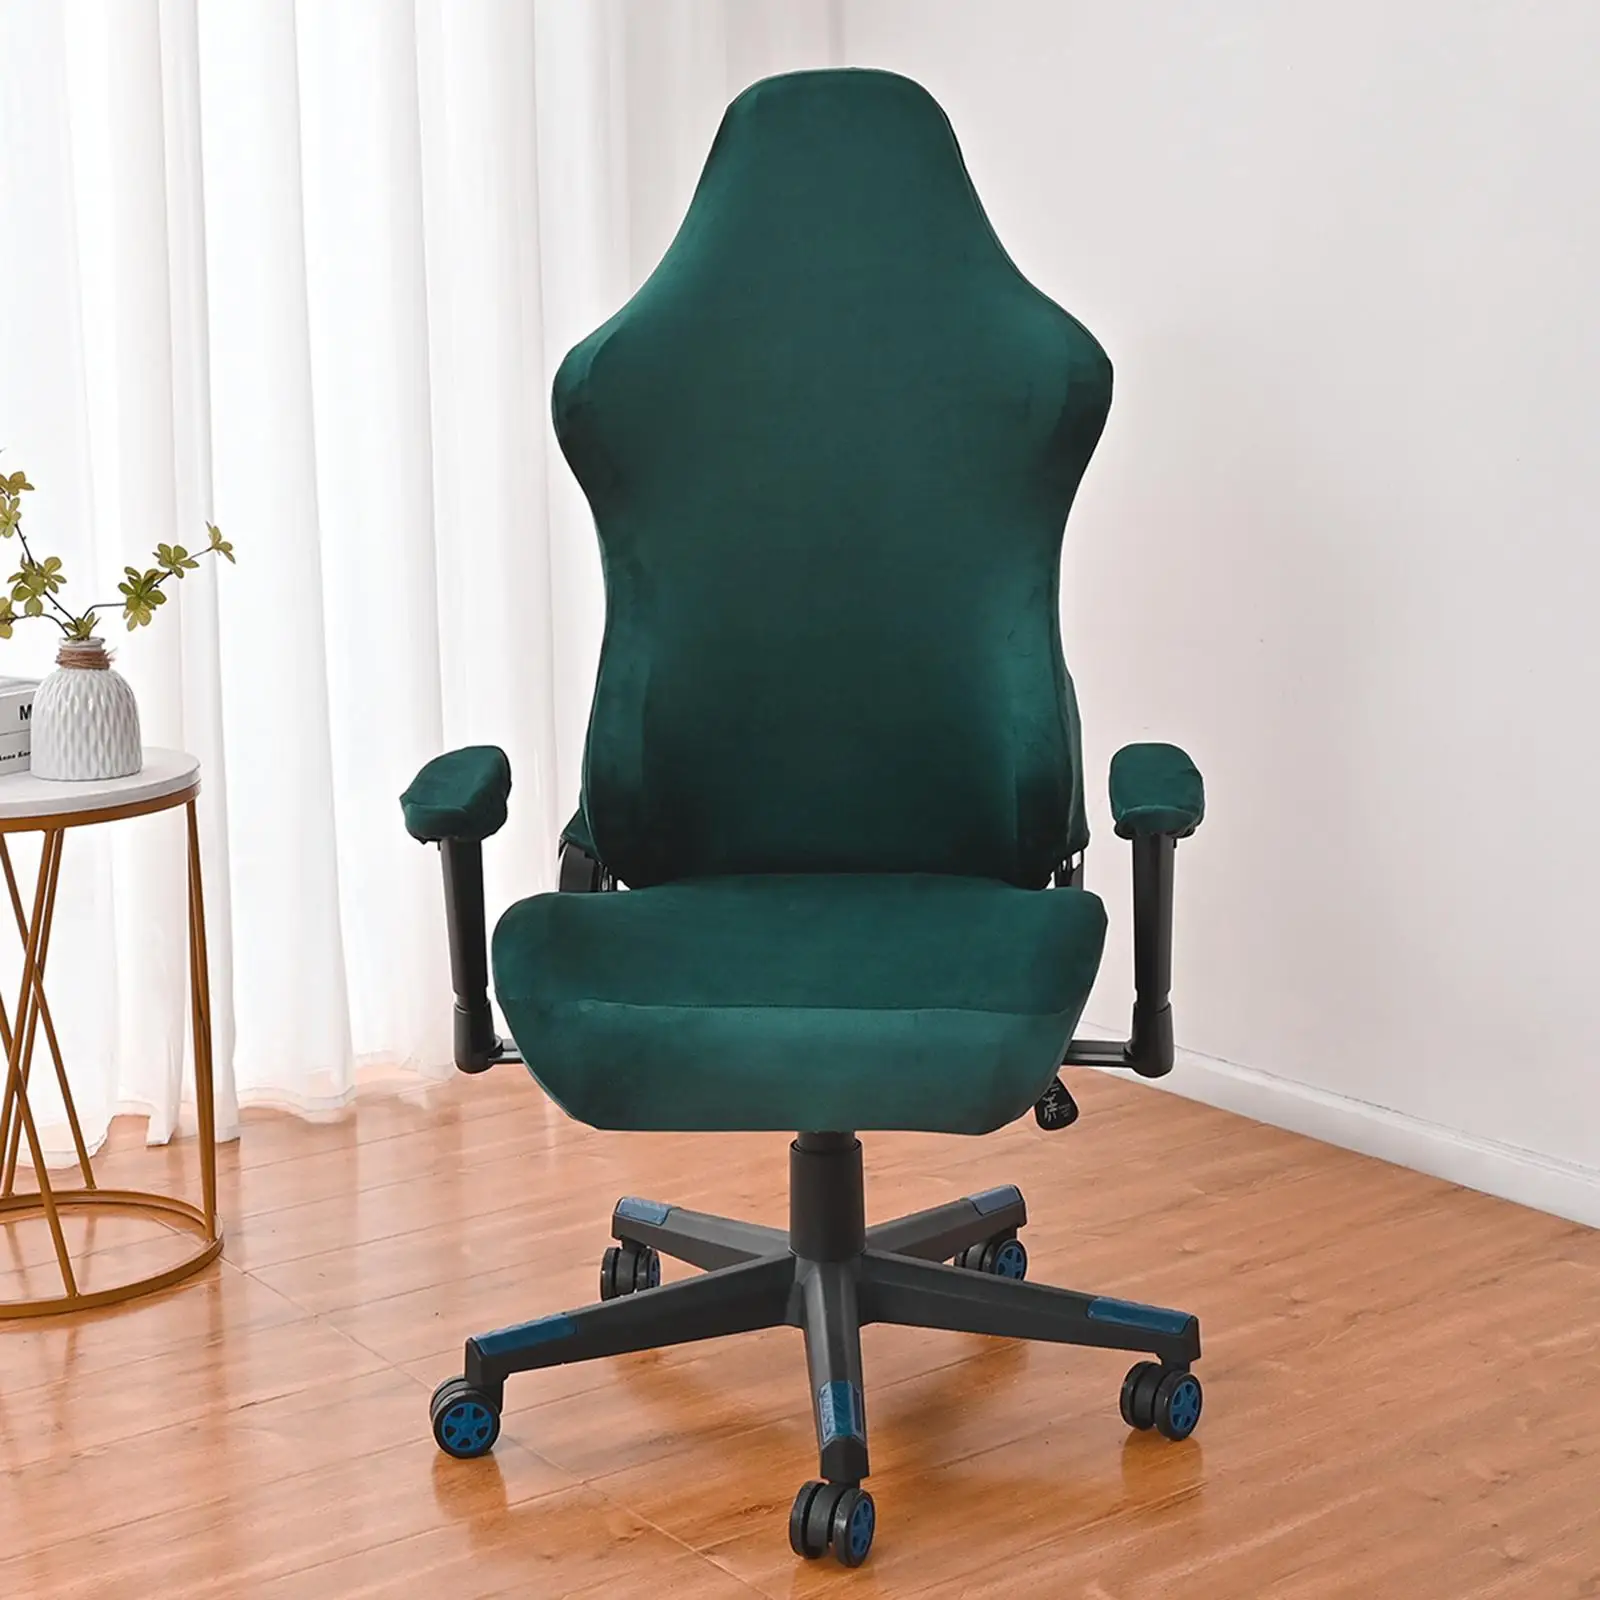 Office Chair Slipcover with Arm Rest Covers Stretchable Washable Seat and Back